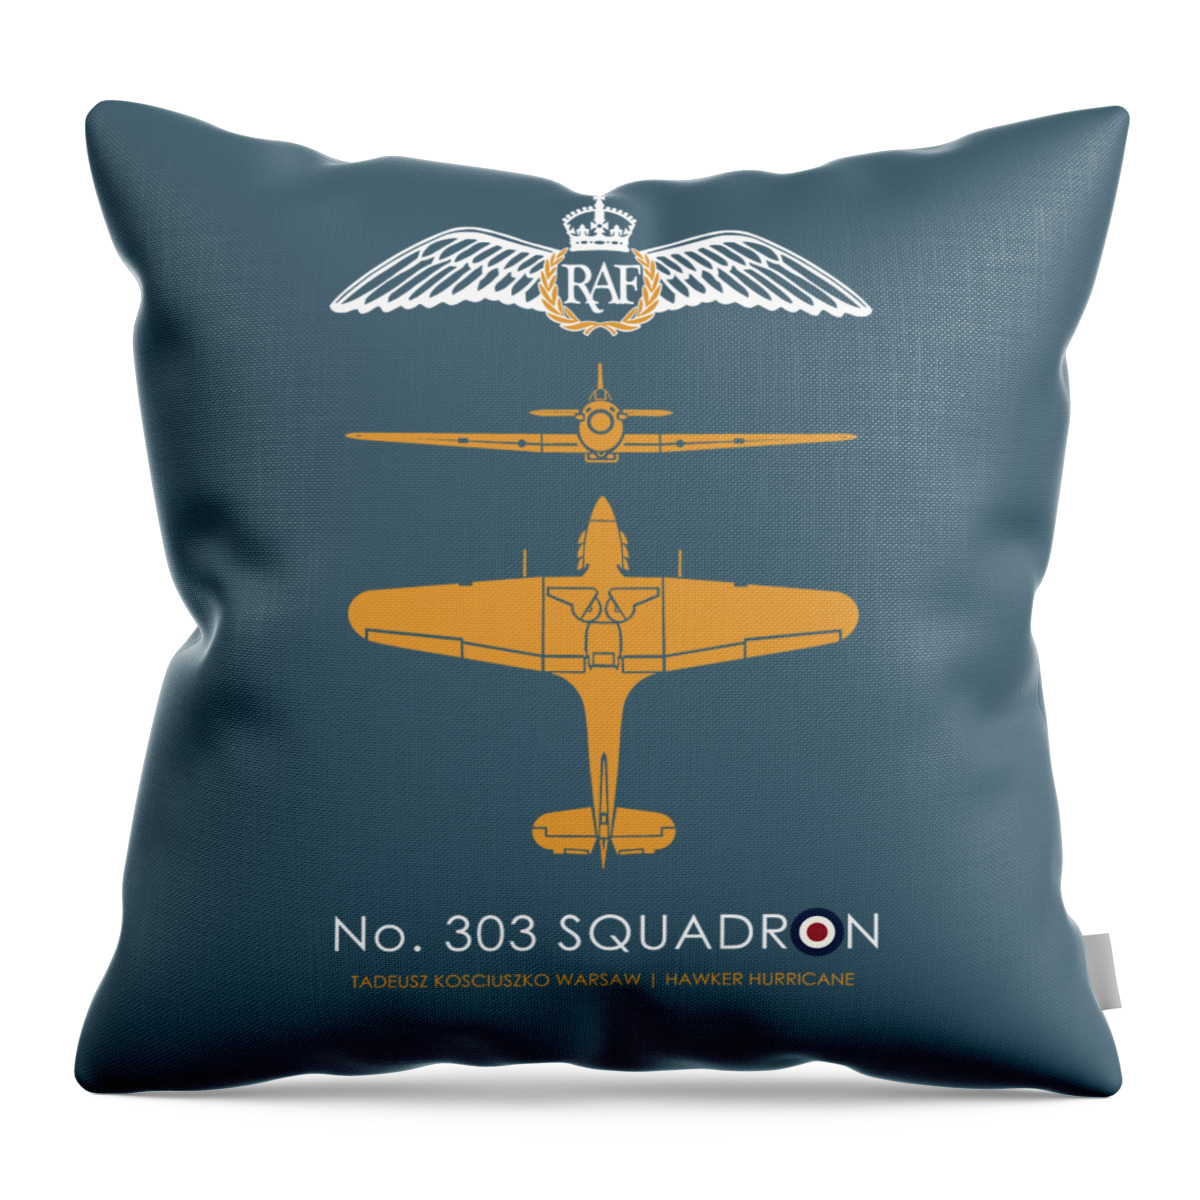 303 Squadron Throw Pillow featuring the photograph 303 Squadron by Mark Rogan